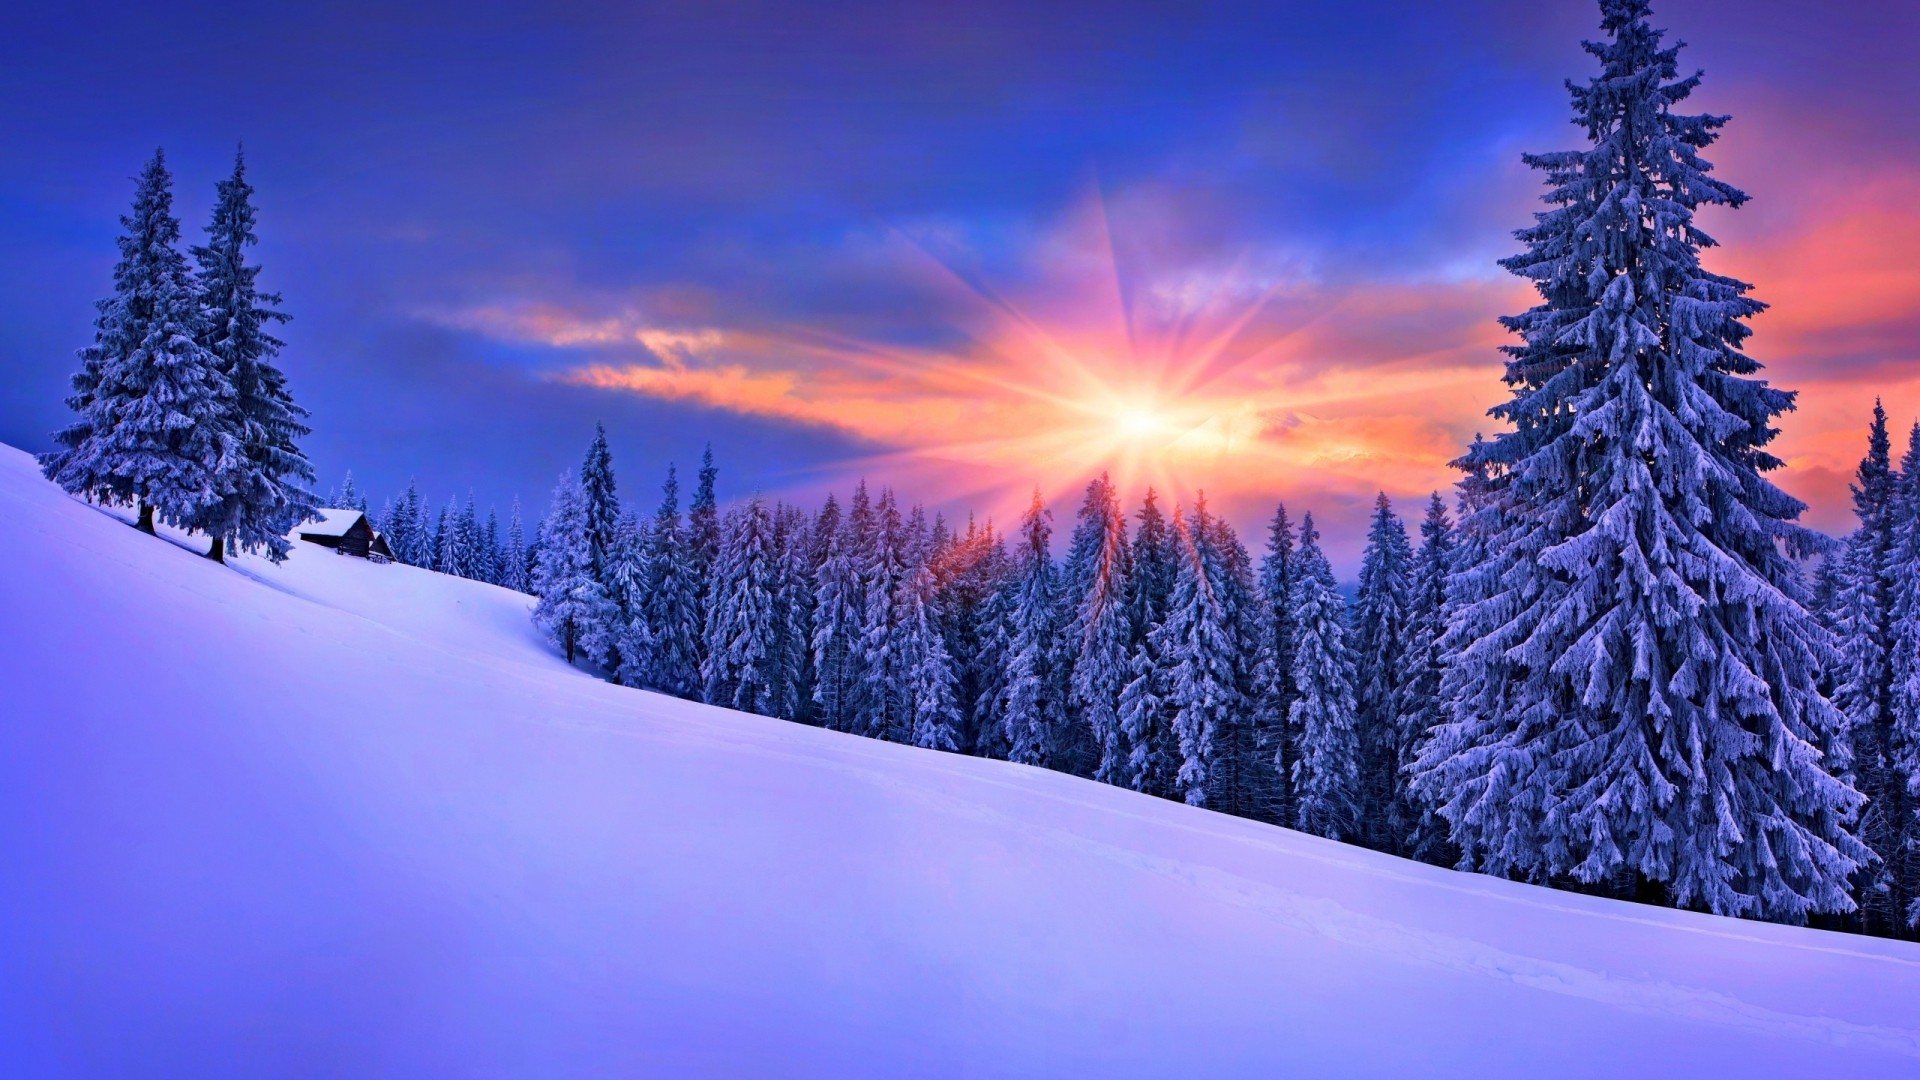 General 1920x1080 pine trees landscape winter sunset snow cold ice trees outdoors sunlight